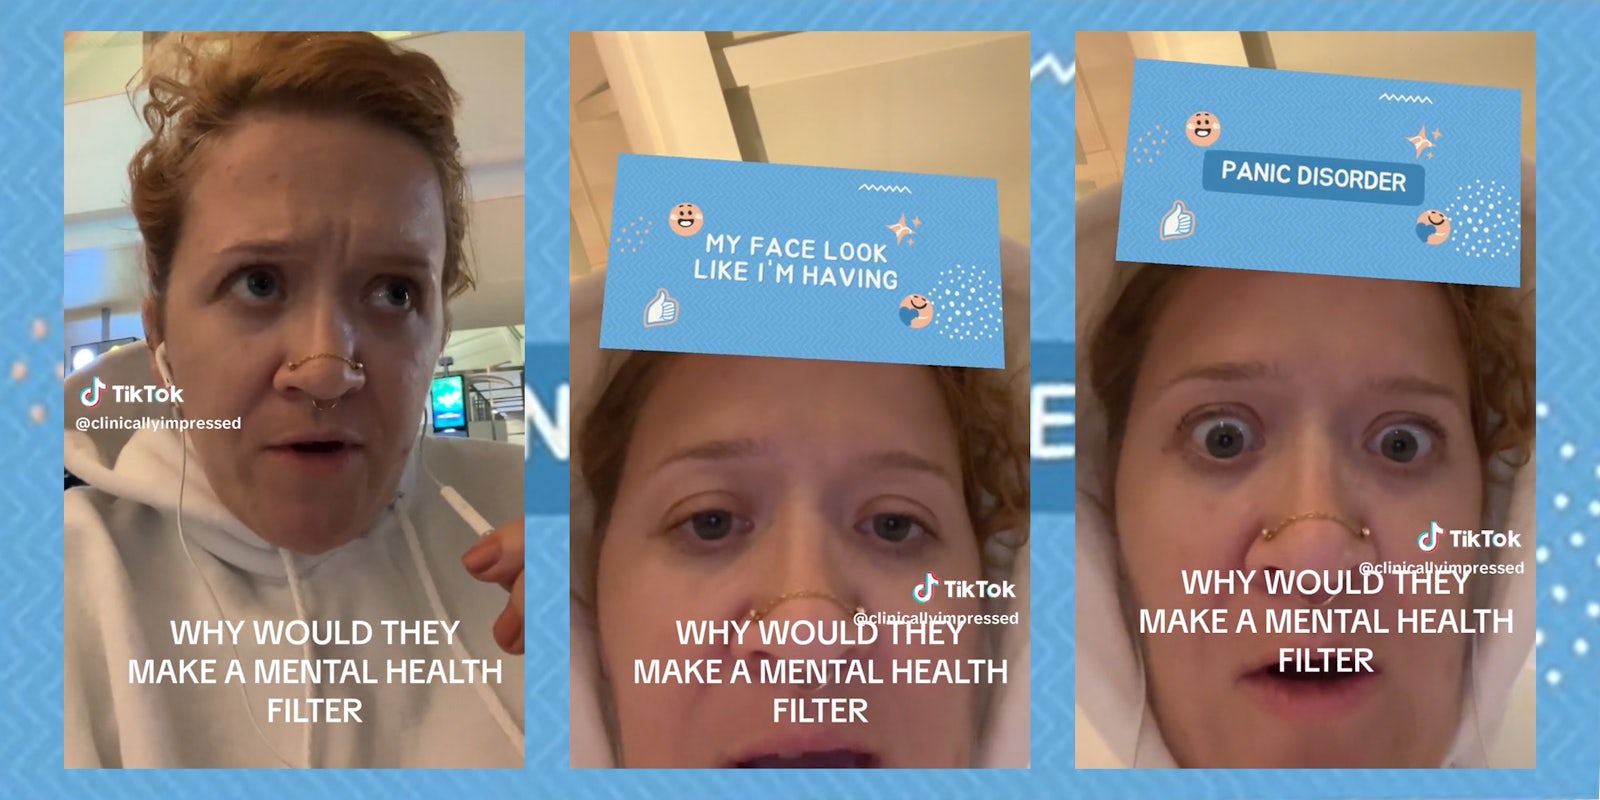 woman with 'mental health filter' and caption 'why would they make a mental health filter'